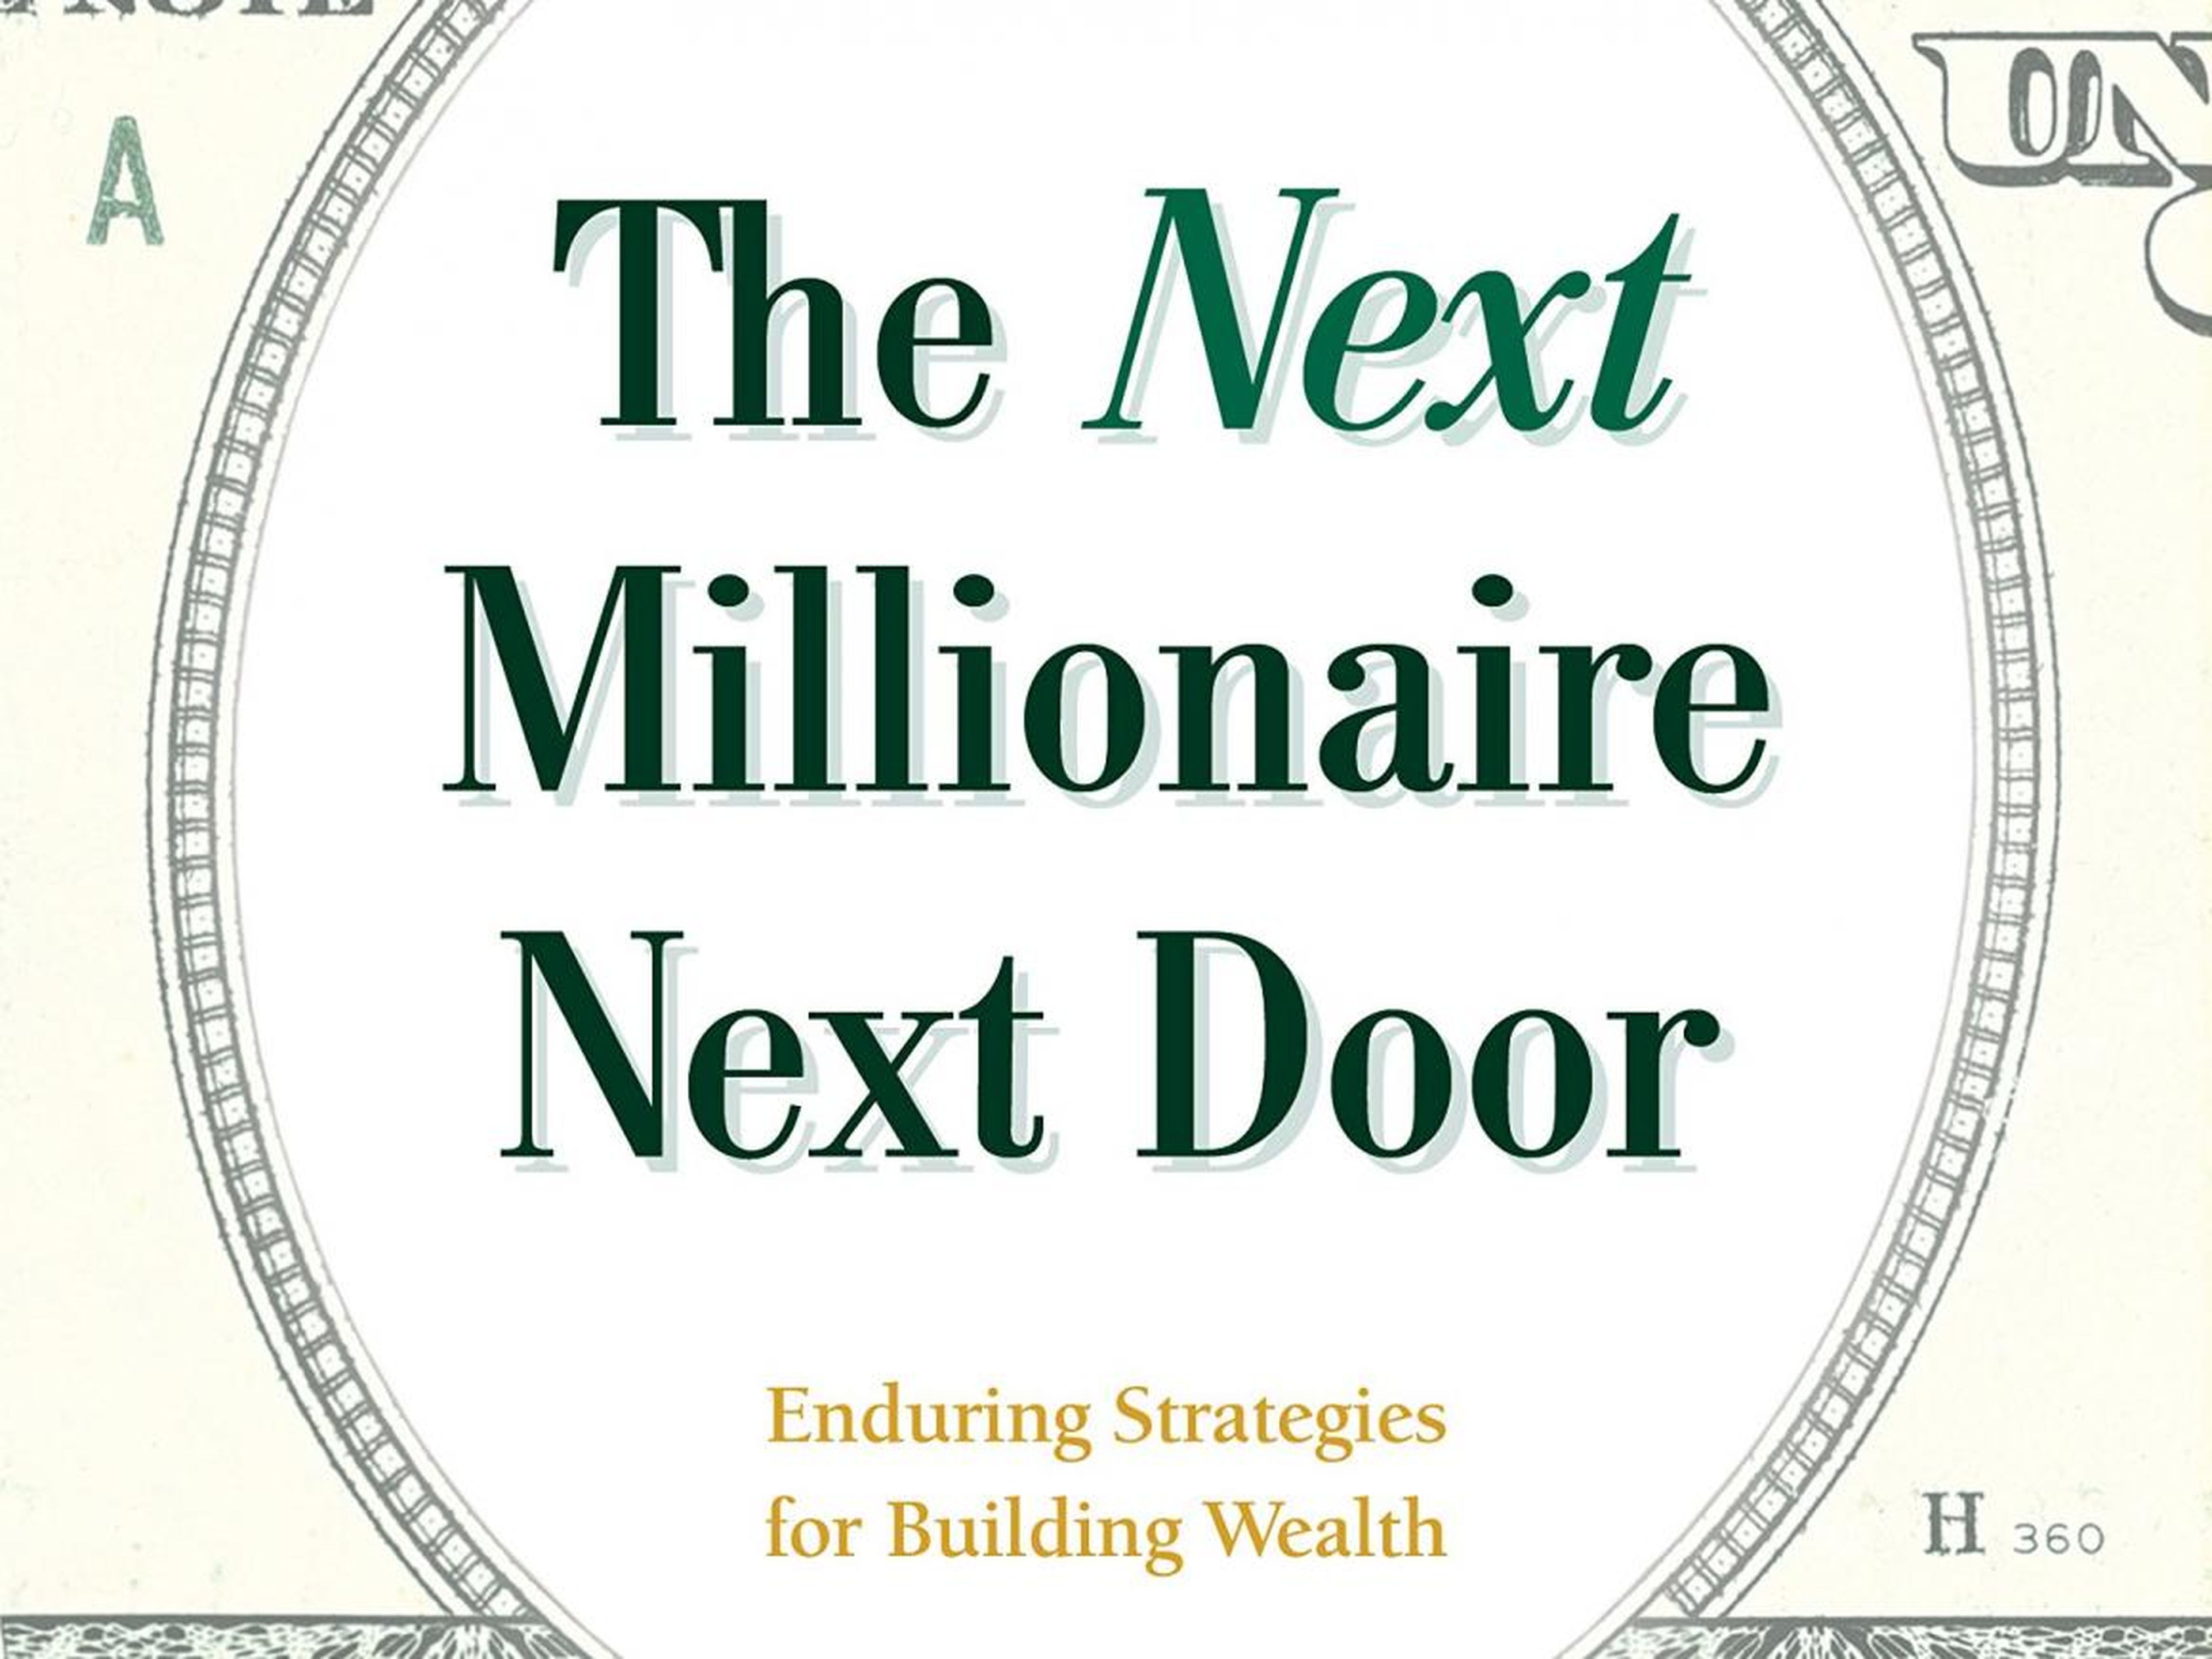 Sarah Stanley Fallaw, director of research for the Affluent Market Institute, studied more than 600 millionaires for her book, "The Next Millionaire Next Door: Enduring Strategies for Building Wealth."